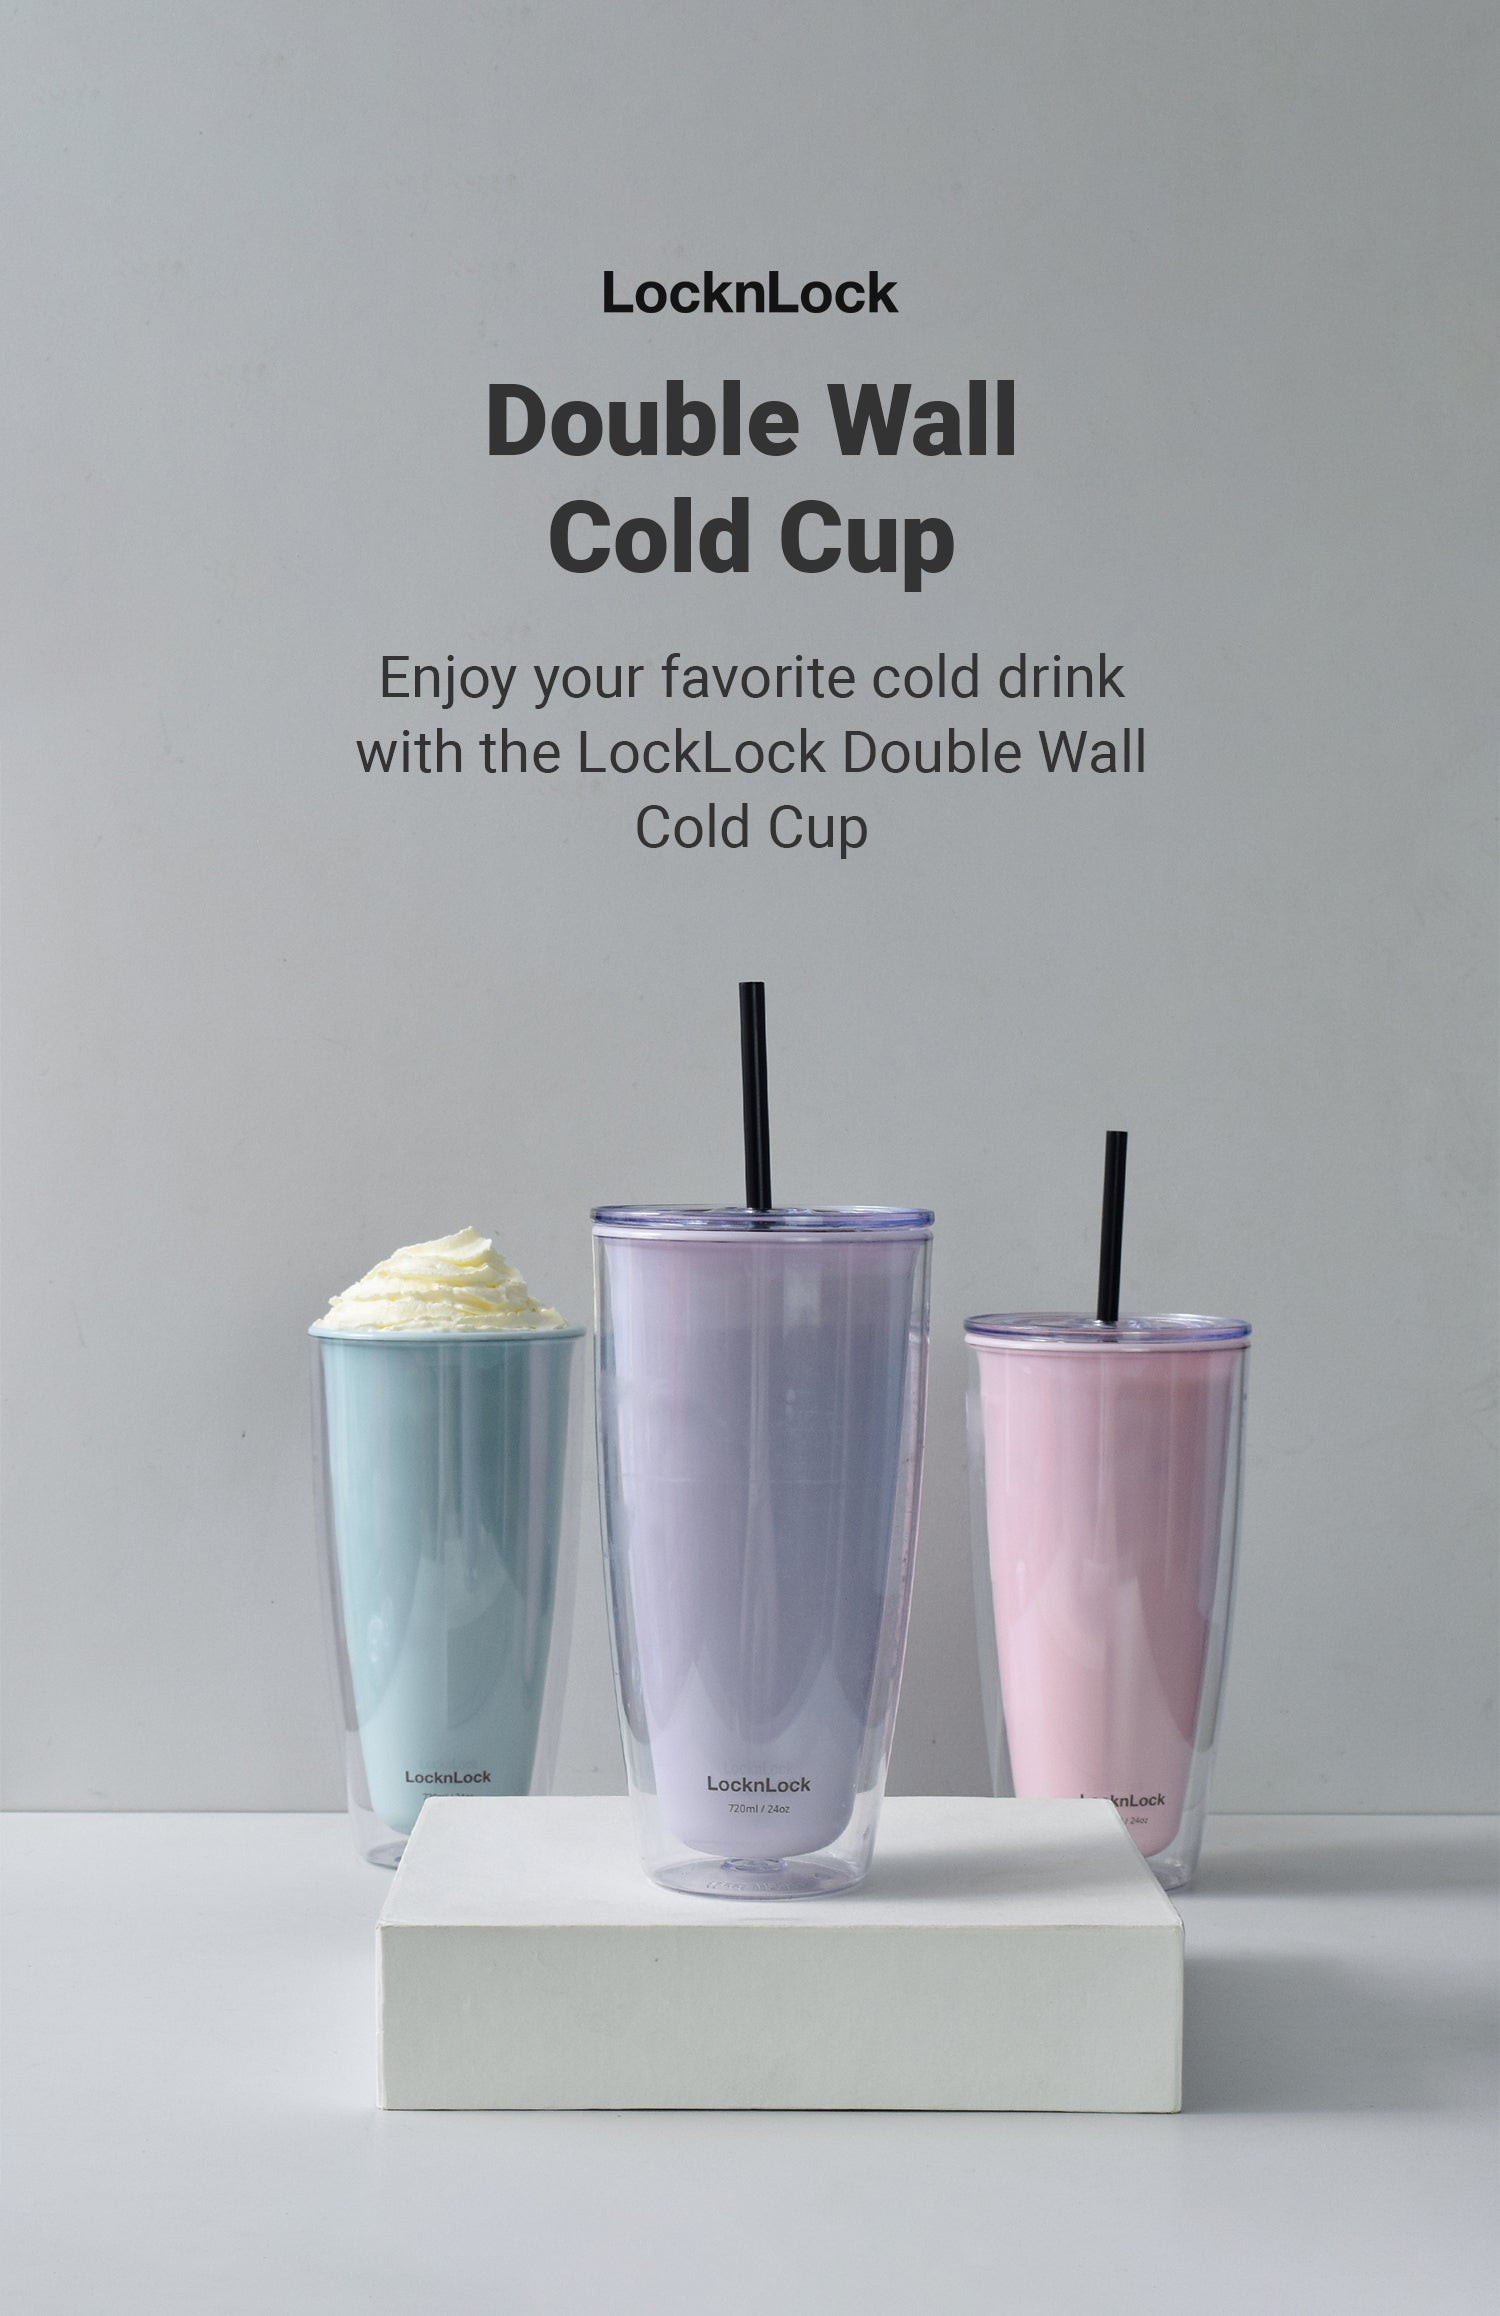 LocknLock Christmas Edition Double Wall Cold Cup 720ml with Box HAP507